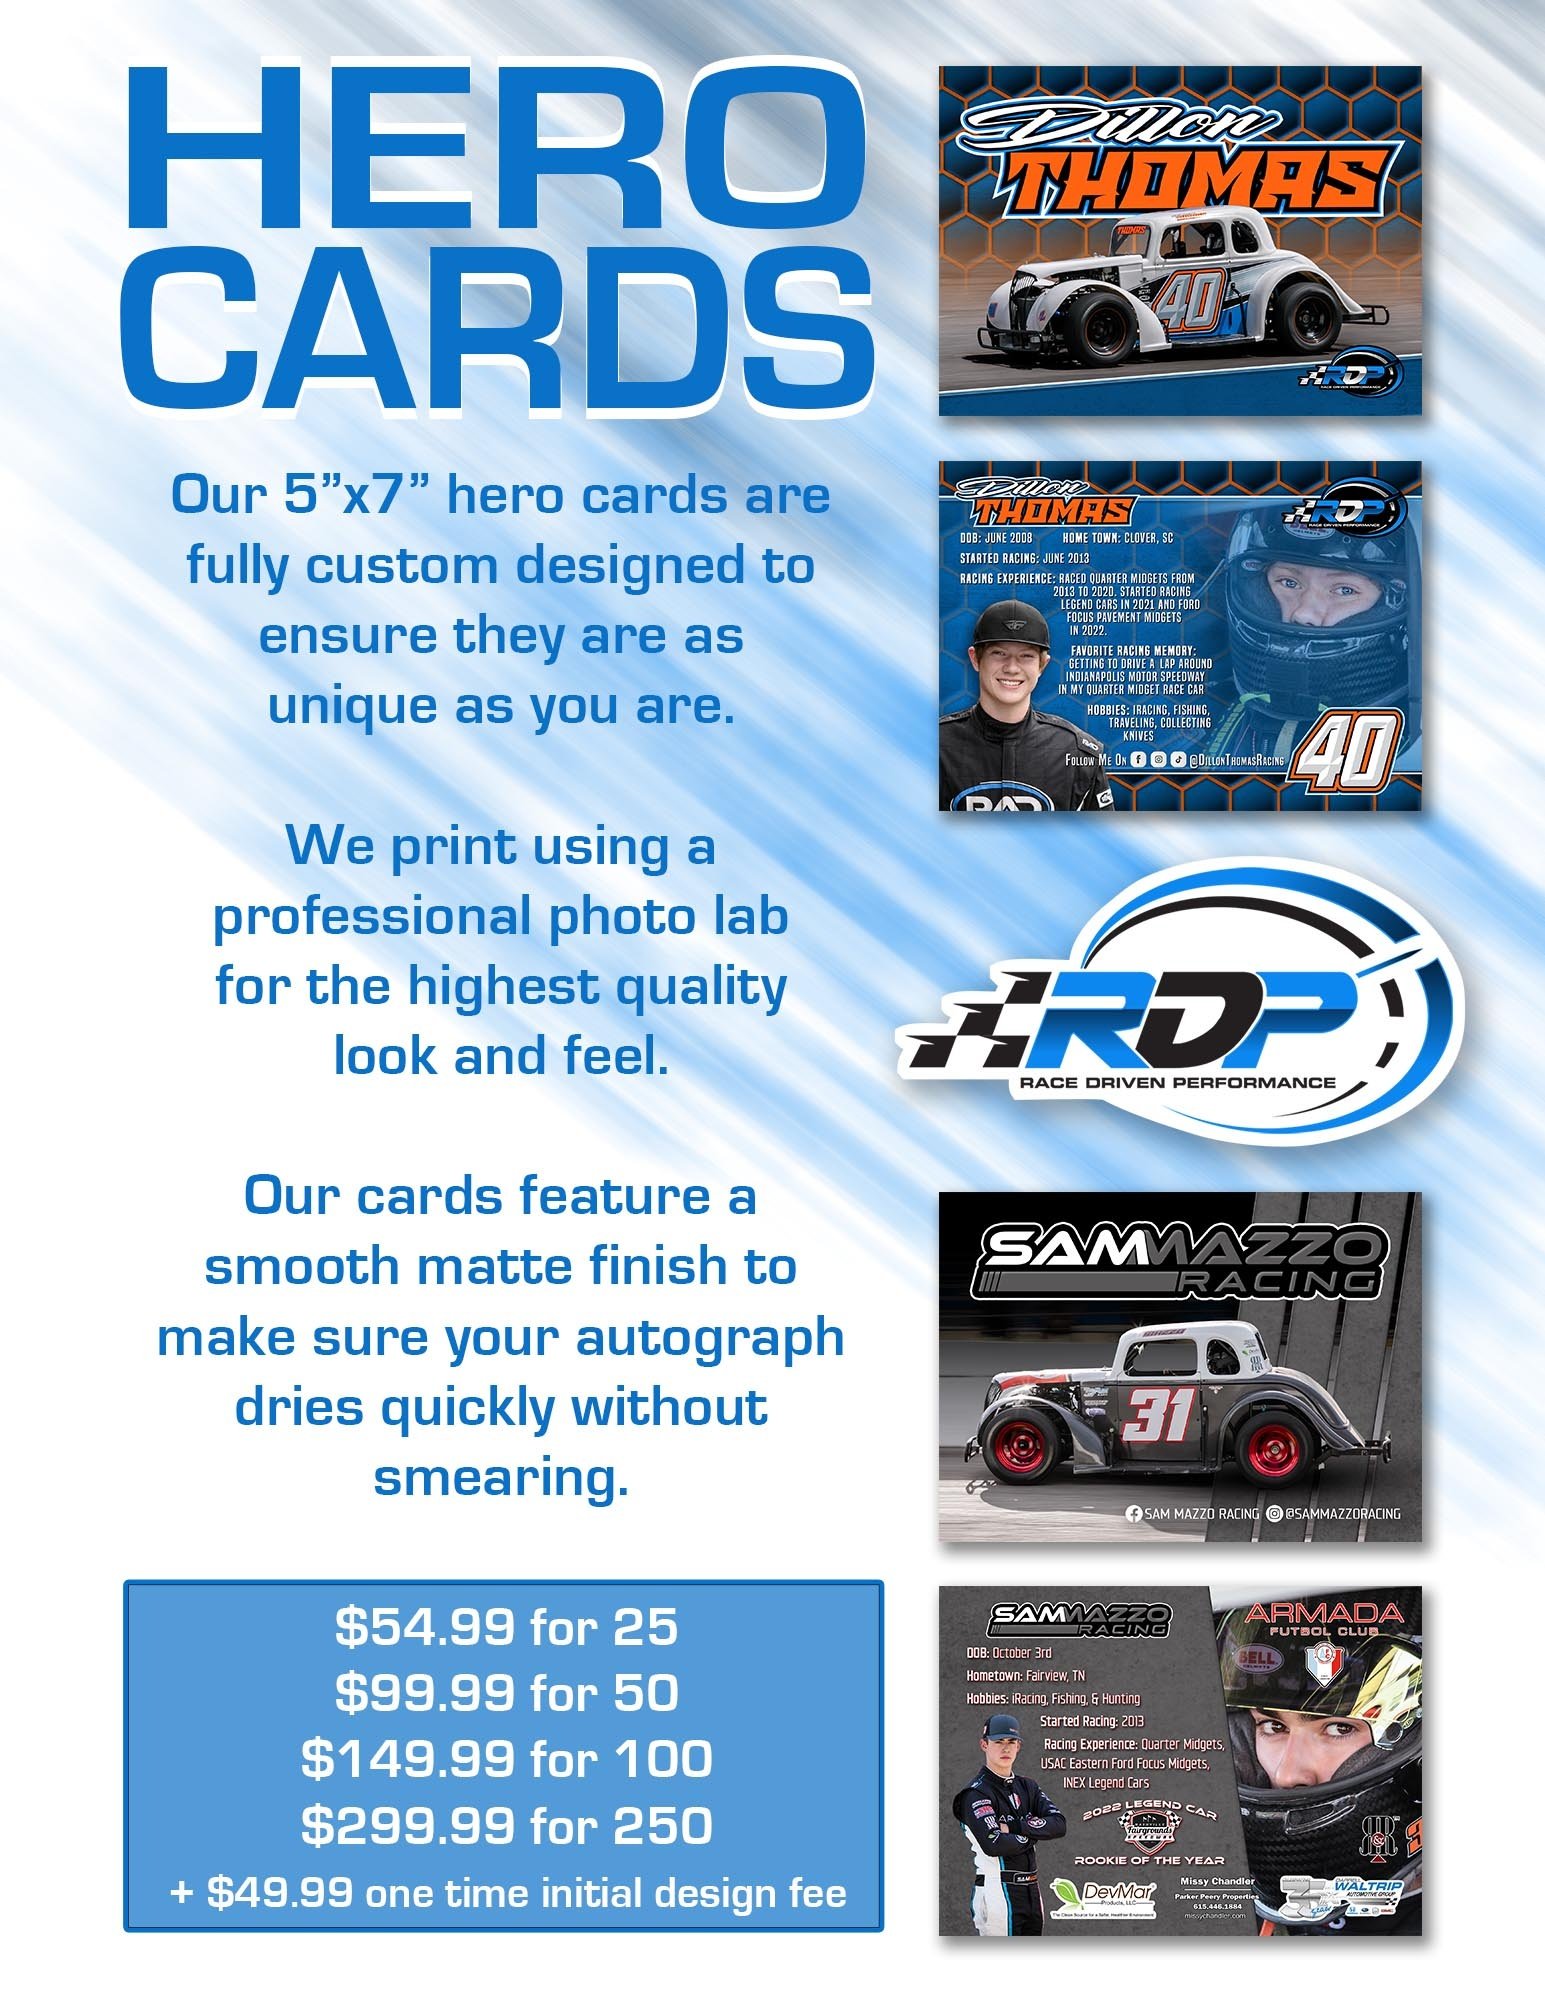 Hero card info sheet with pricing